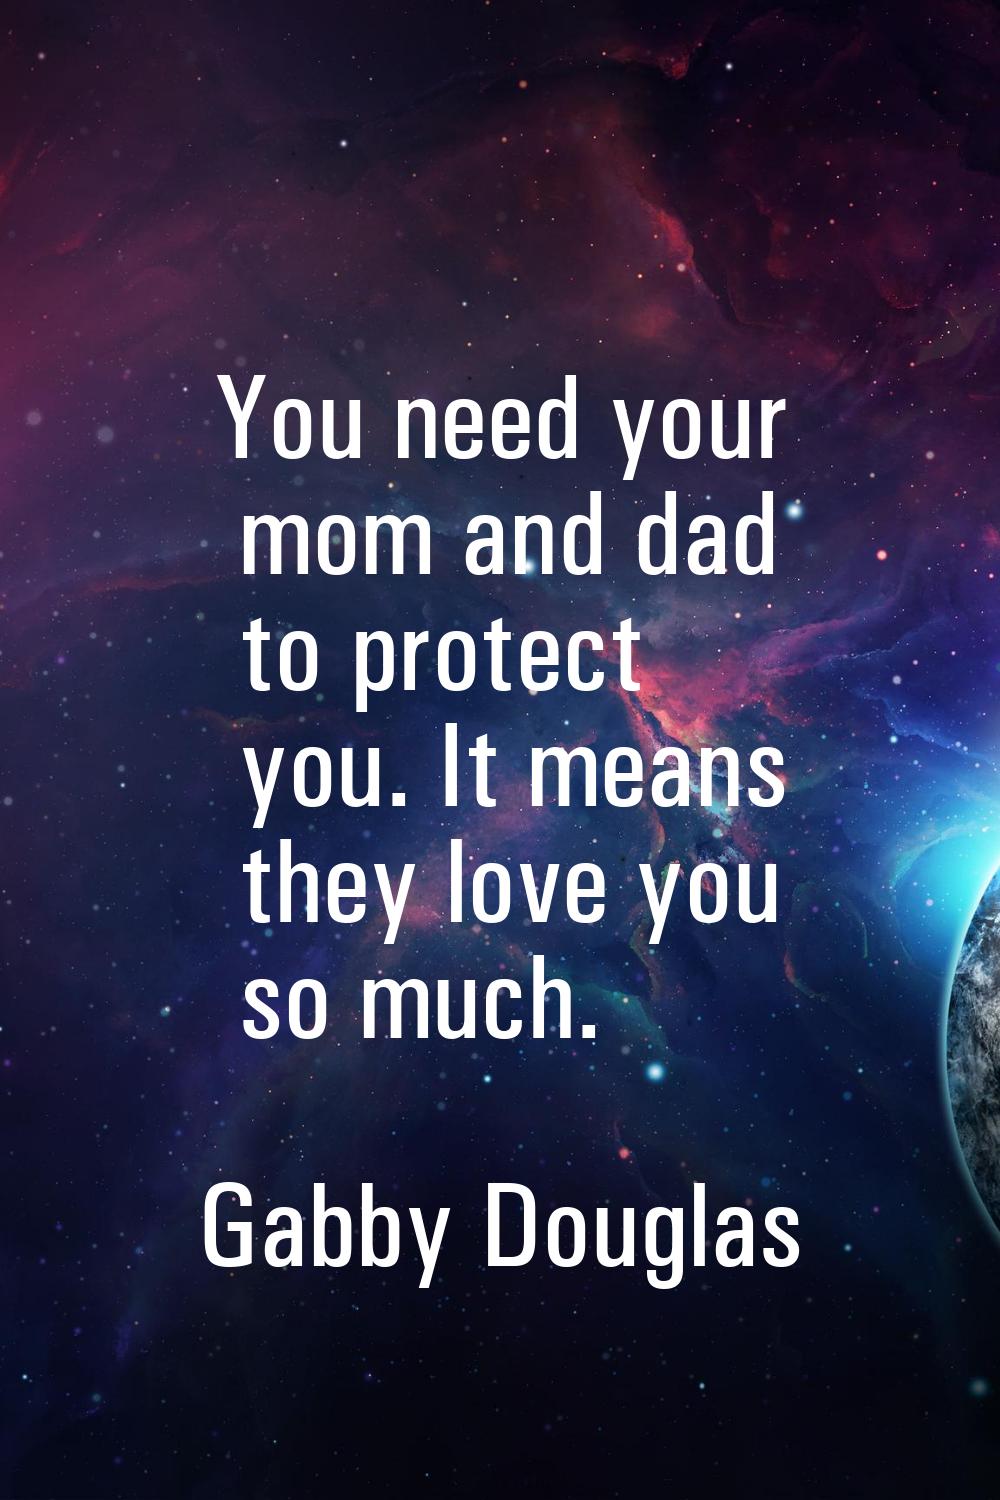 You need your mom and dad to protect you. It means they love you so much.